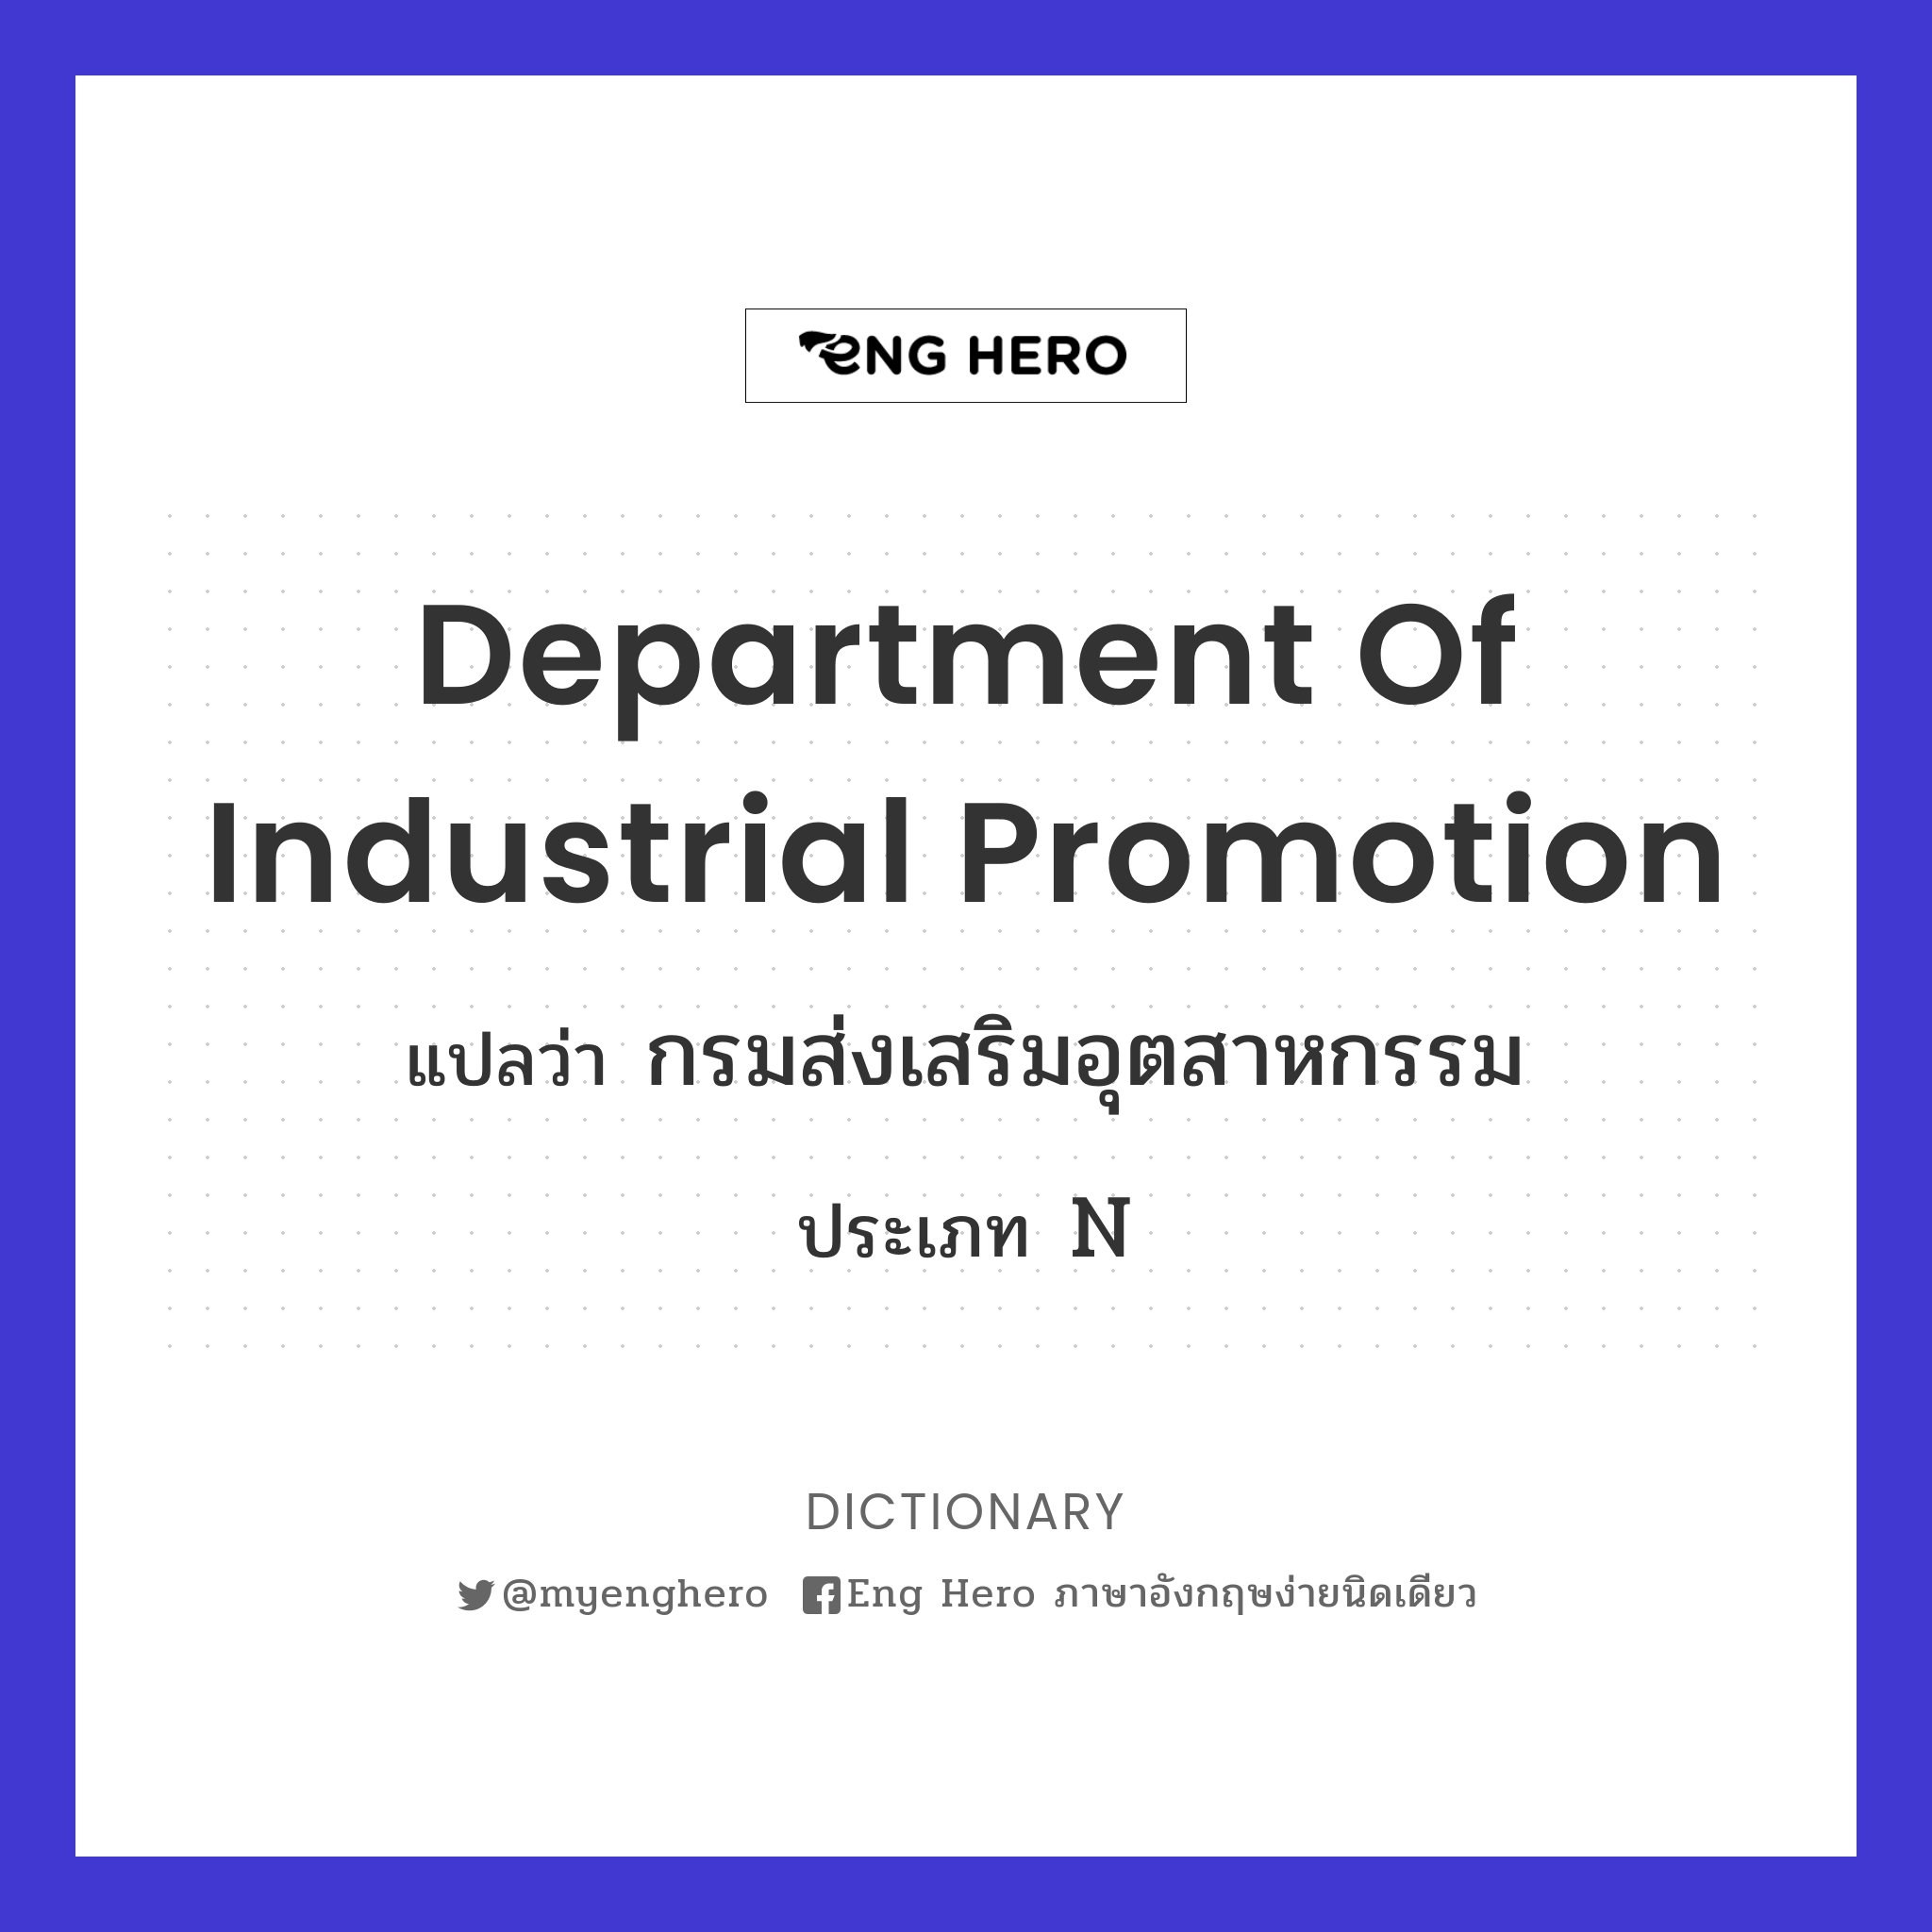 Department of Industrial Promotion